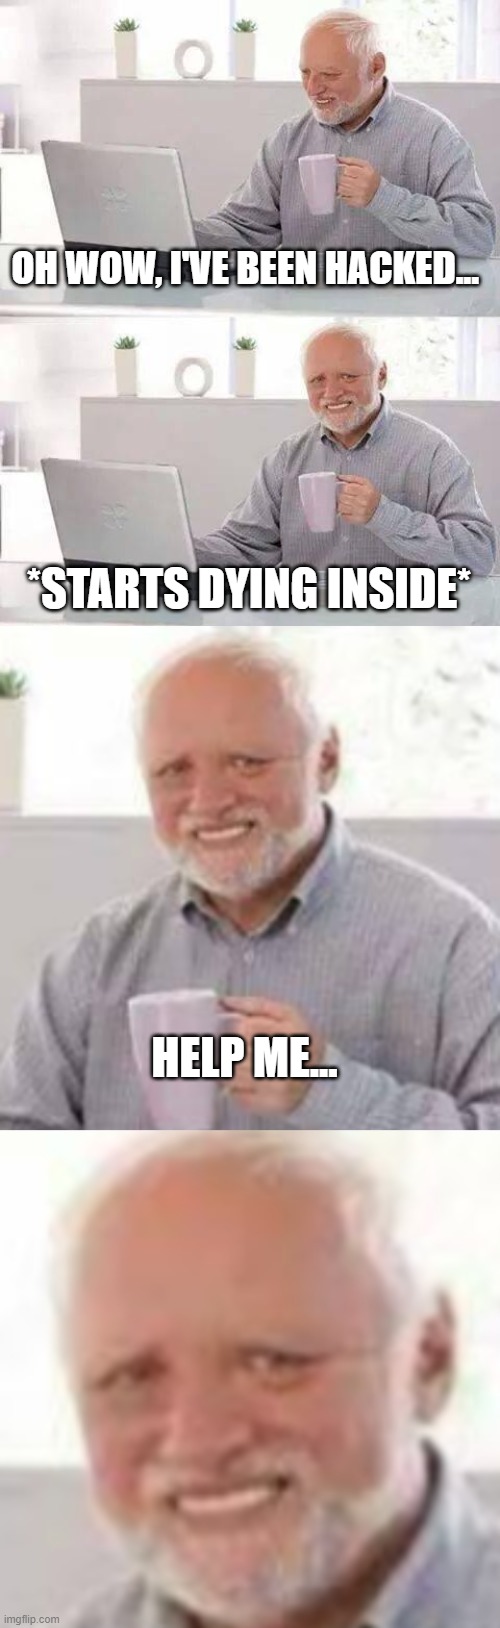 Help this poor man... | OH WOW, I'VE BEEN HACKED... *STARTS DYING INSIDE*; HELP ME... | image tagged in memes,hide the pain harold,why me,funny,lol,cringe | made w/ Imgflip meme maker